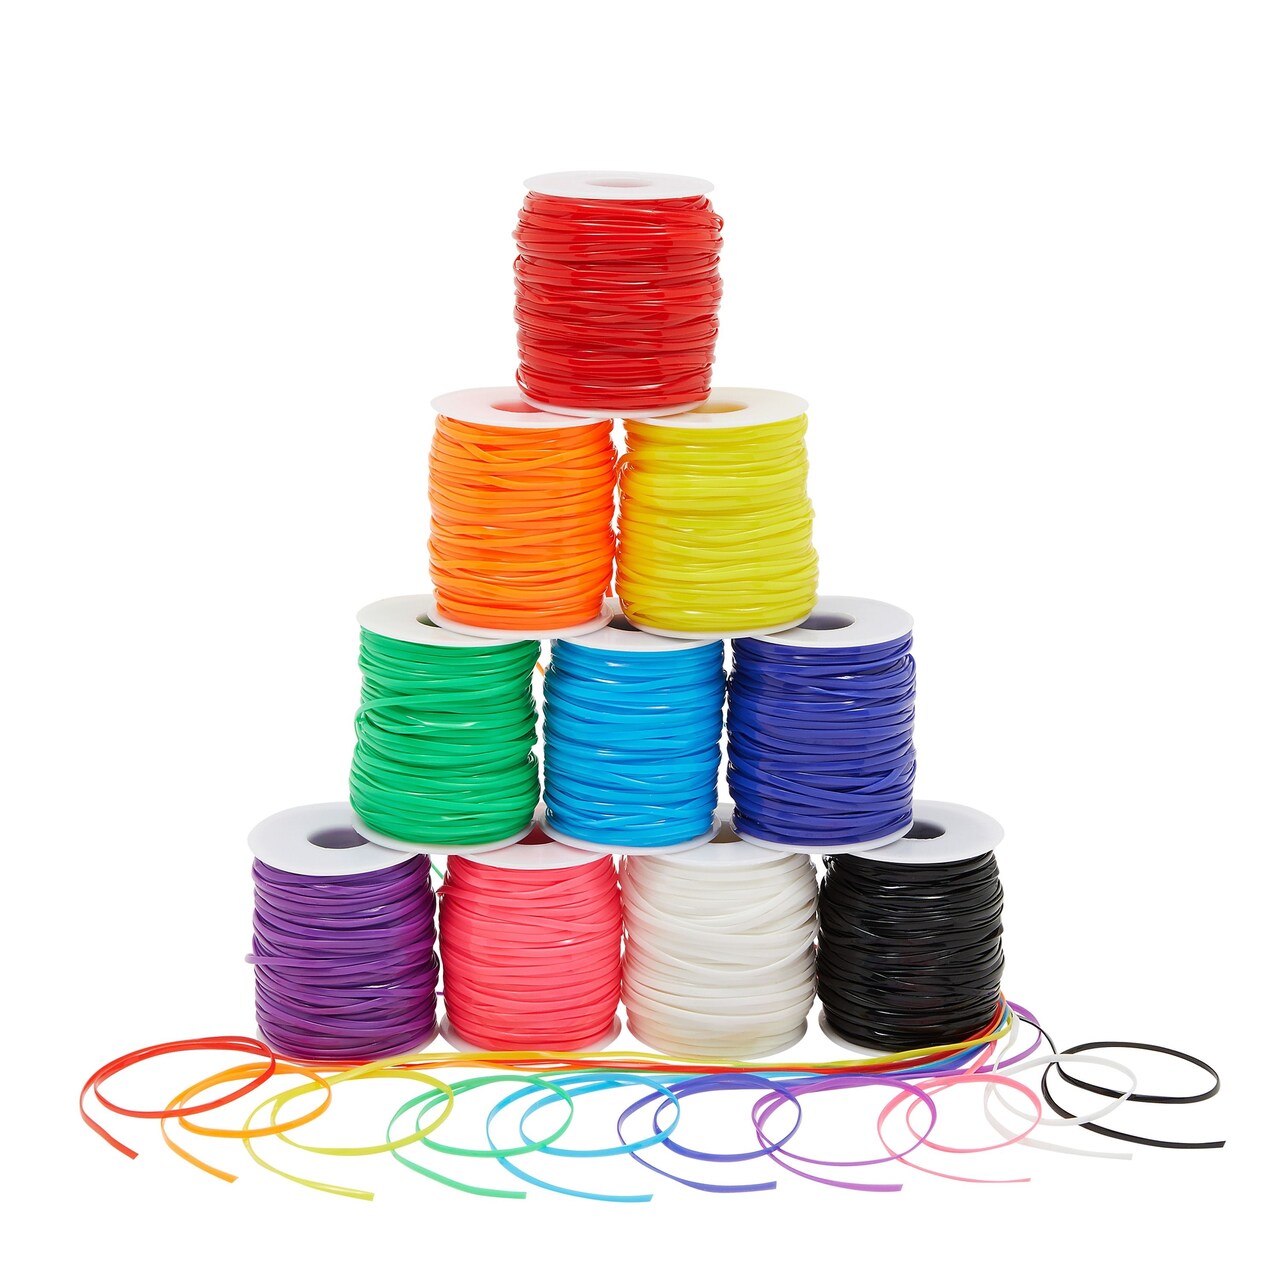 10 Spools Plastic Gimp String in 10 Colors, 50 Yards/Each for Bracelets, Necklaces, Boondoggle Keychains, Lanyard Cord